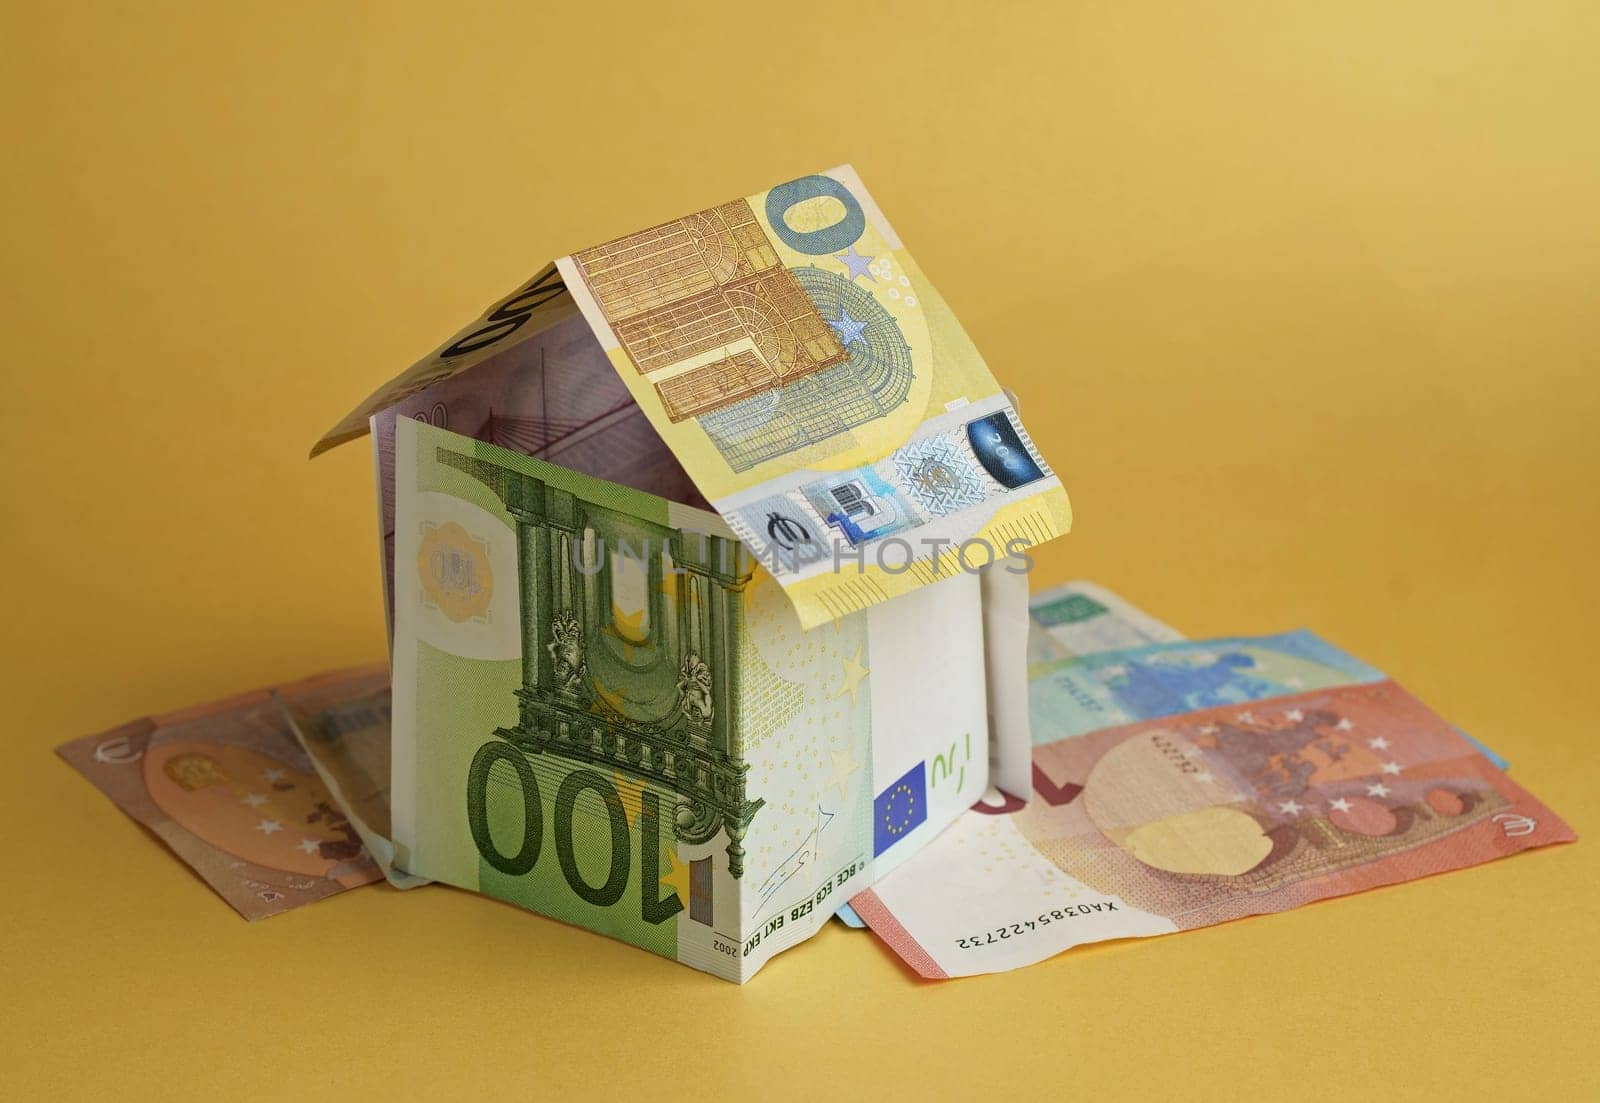 House made from euro banknotes concept for real estate prices, mortgages or home financing